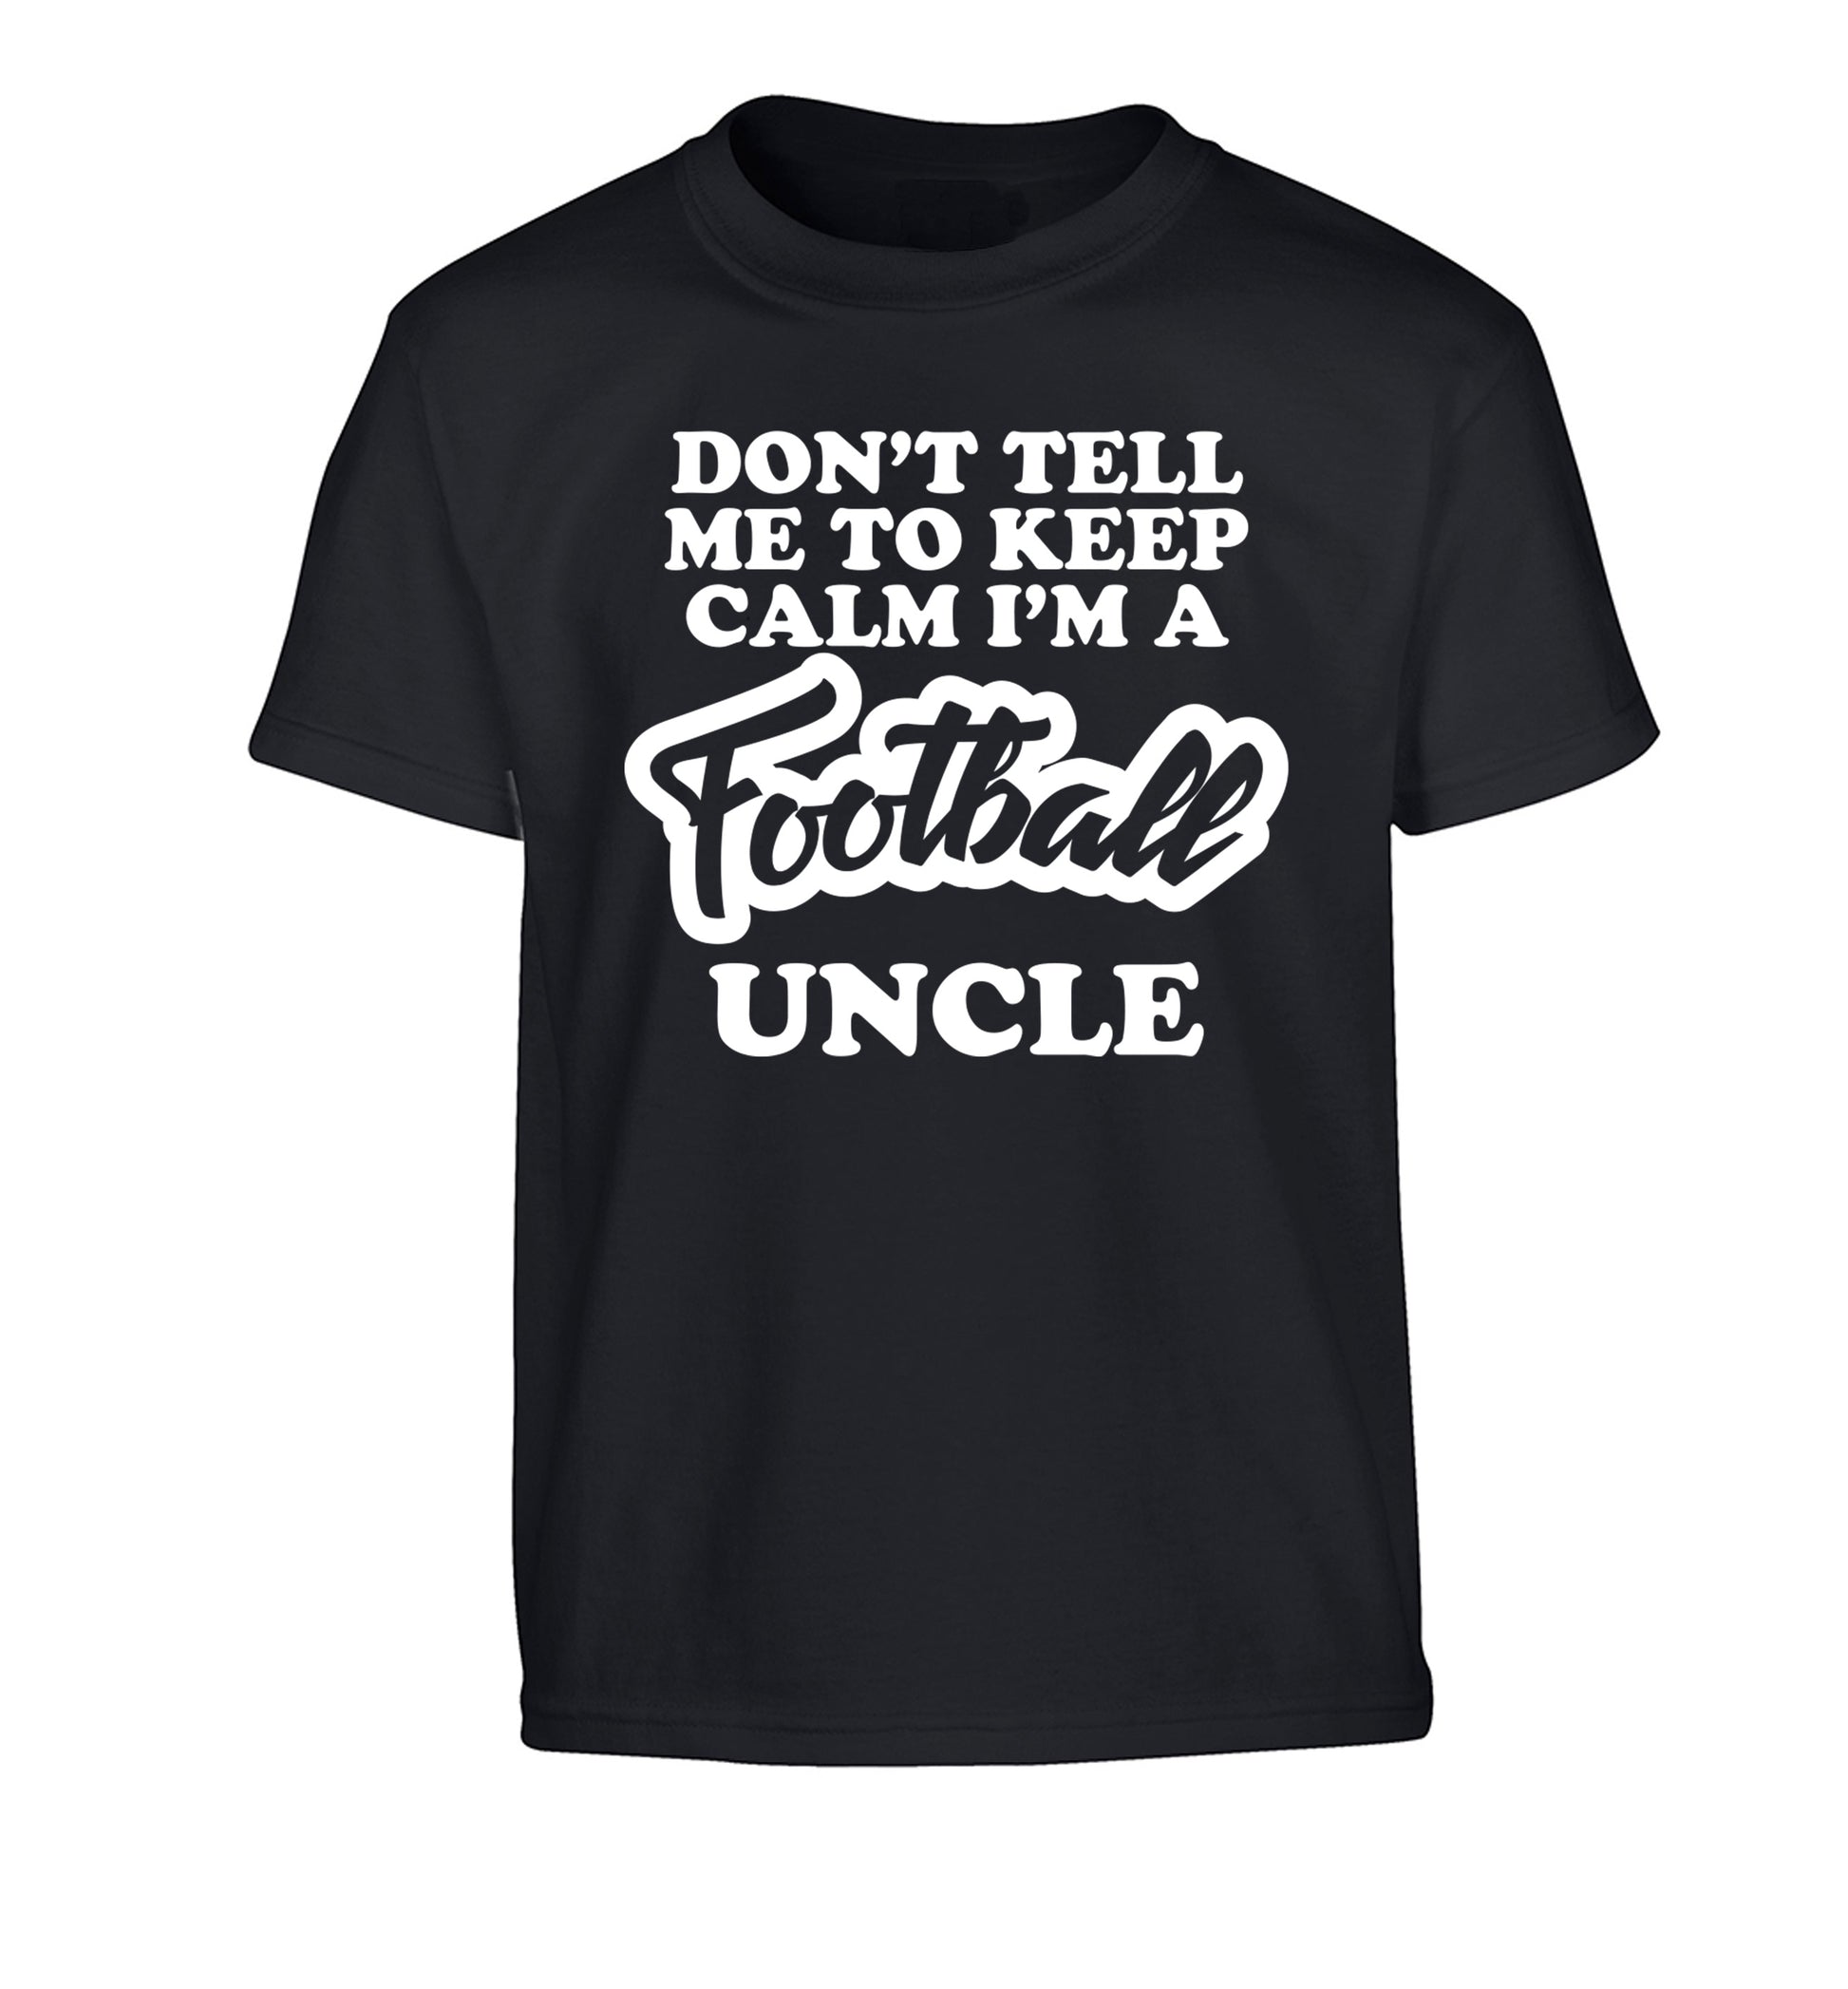 Don't tell me to keep calm I'm a football uncle Children's black Tshirt 12-14 Years